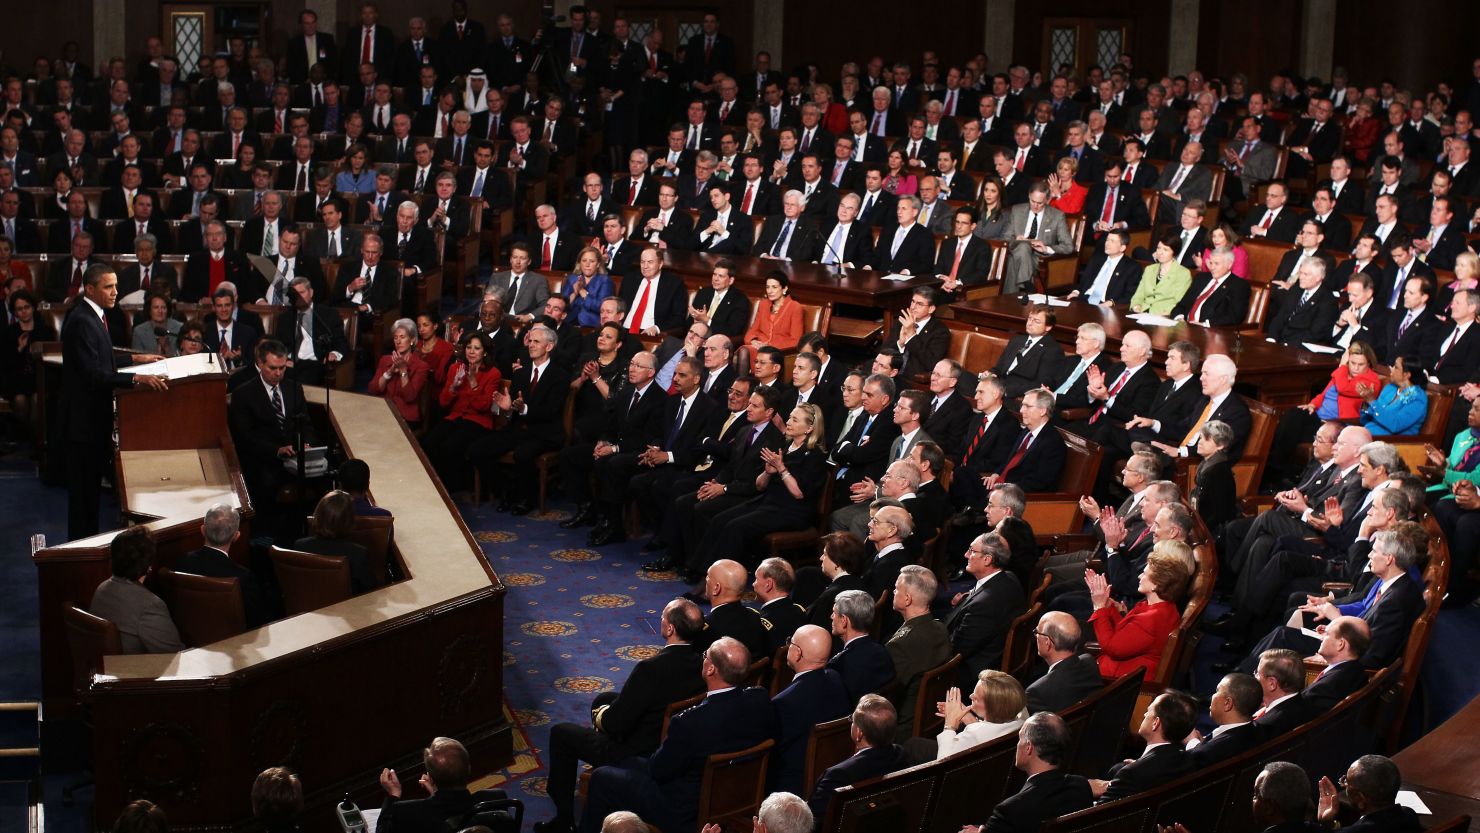 President Obama addresses a joint session of Congress.